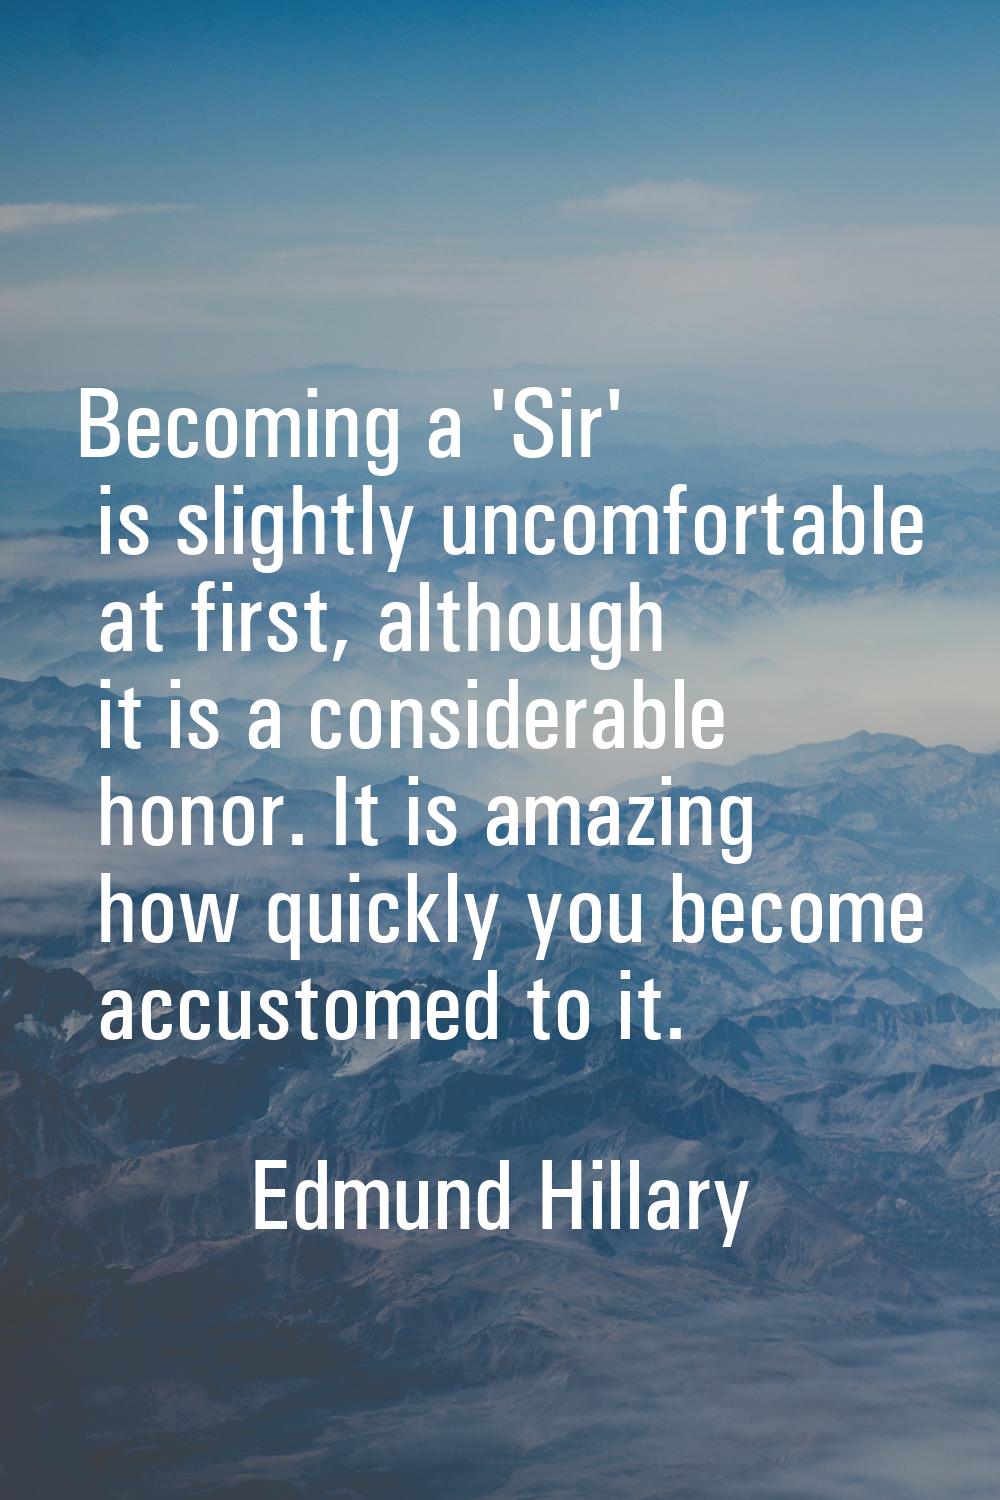 Becoming a 'Sir' is slightly uncomfortable at first, although it is a considerable honor. It is ama